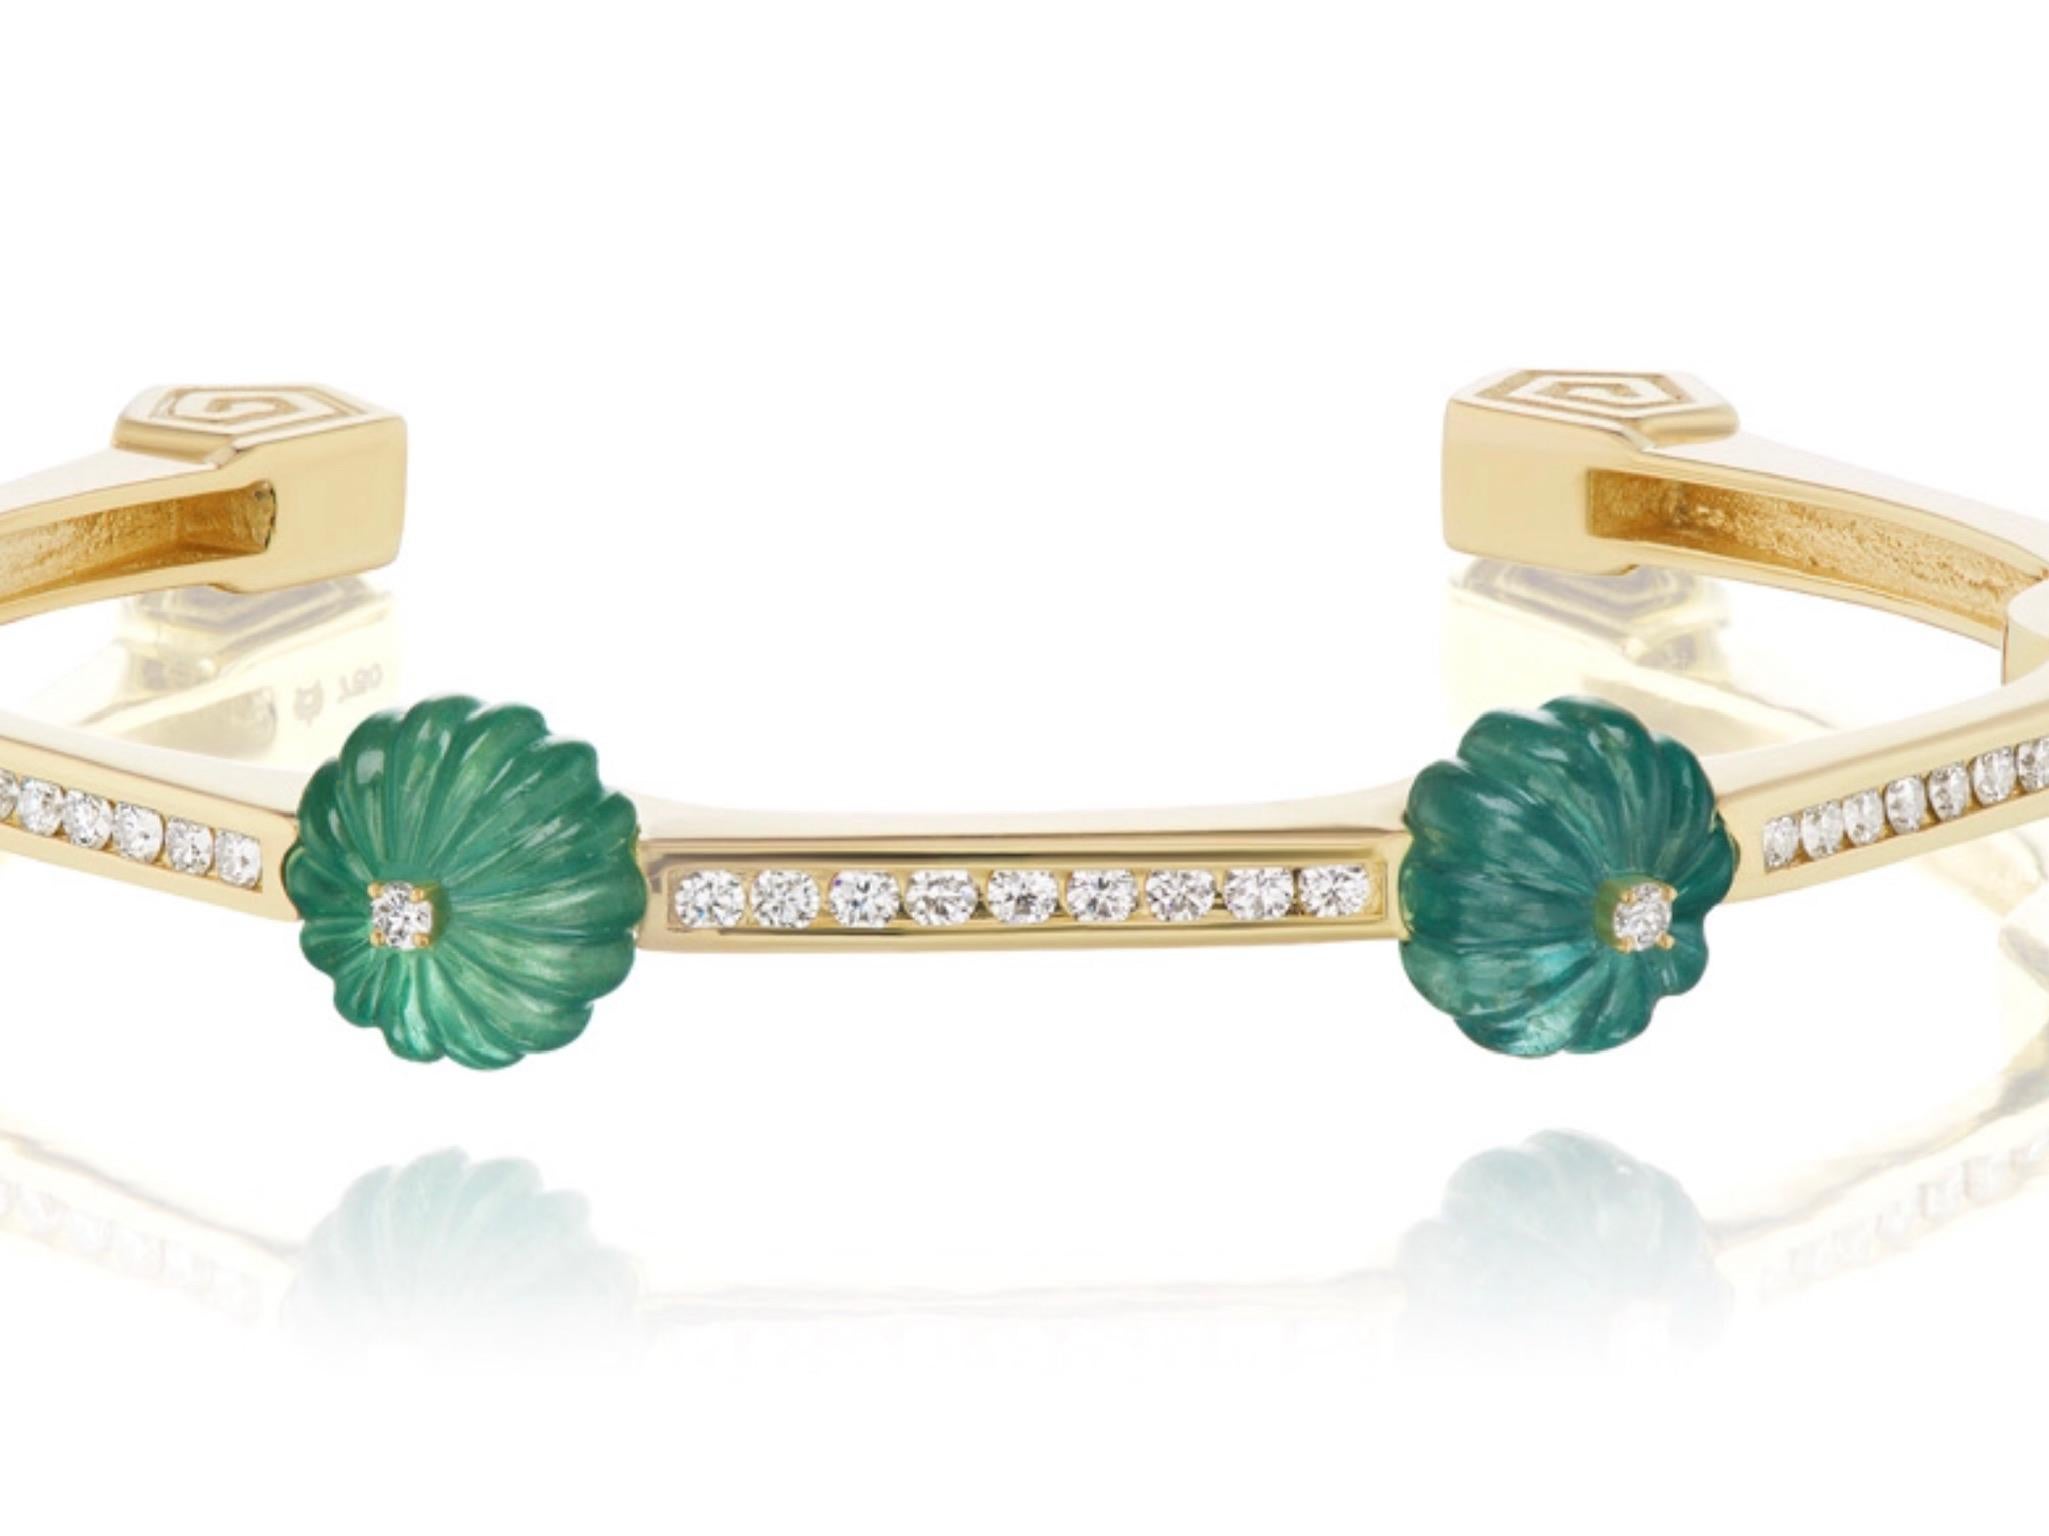 15.5 carats of Carved Emeralds makes up this new bracelet by Andrew Glassford. It contains .77 carats of G/H VSI round diamonds and is fashioned as a bangle with 45 degree angles all around the wrist ending in a scroll pattern at the base. On top of